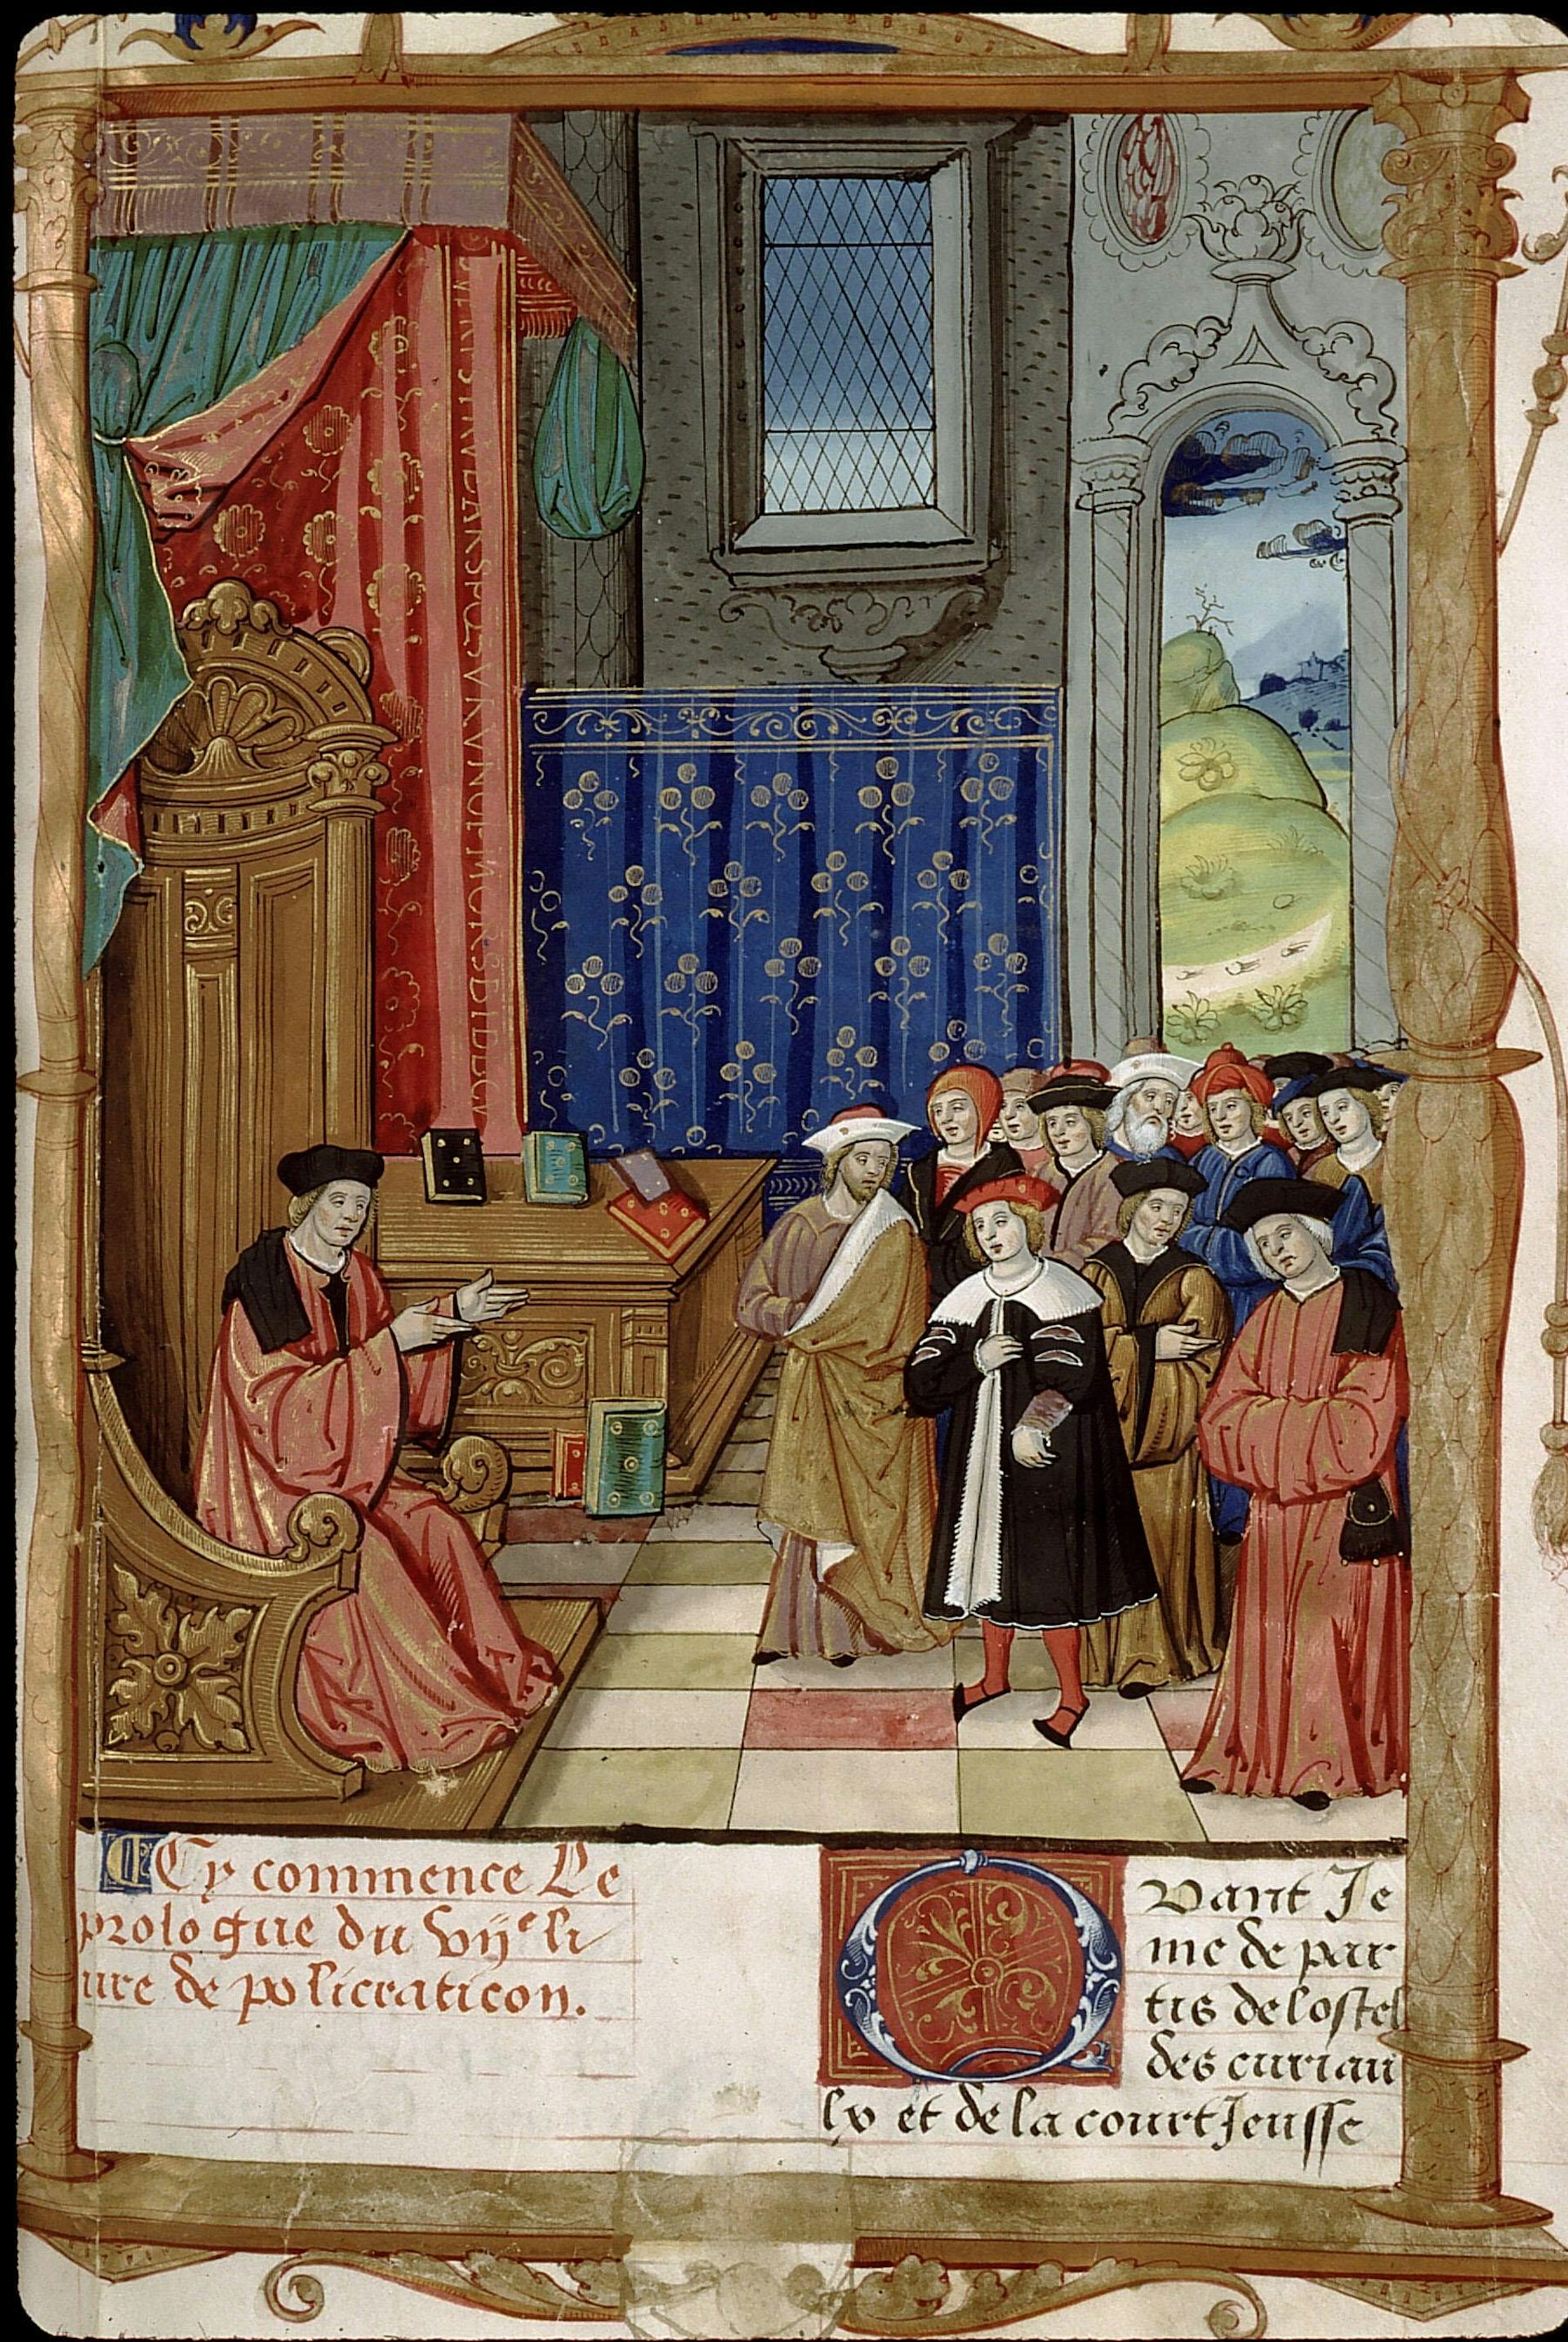 A detailed depiction of a man in a robe and hat sitting on a wooden chair speaking to a group of standing people.